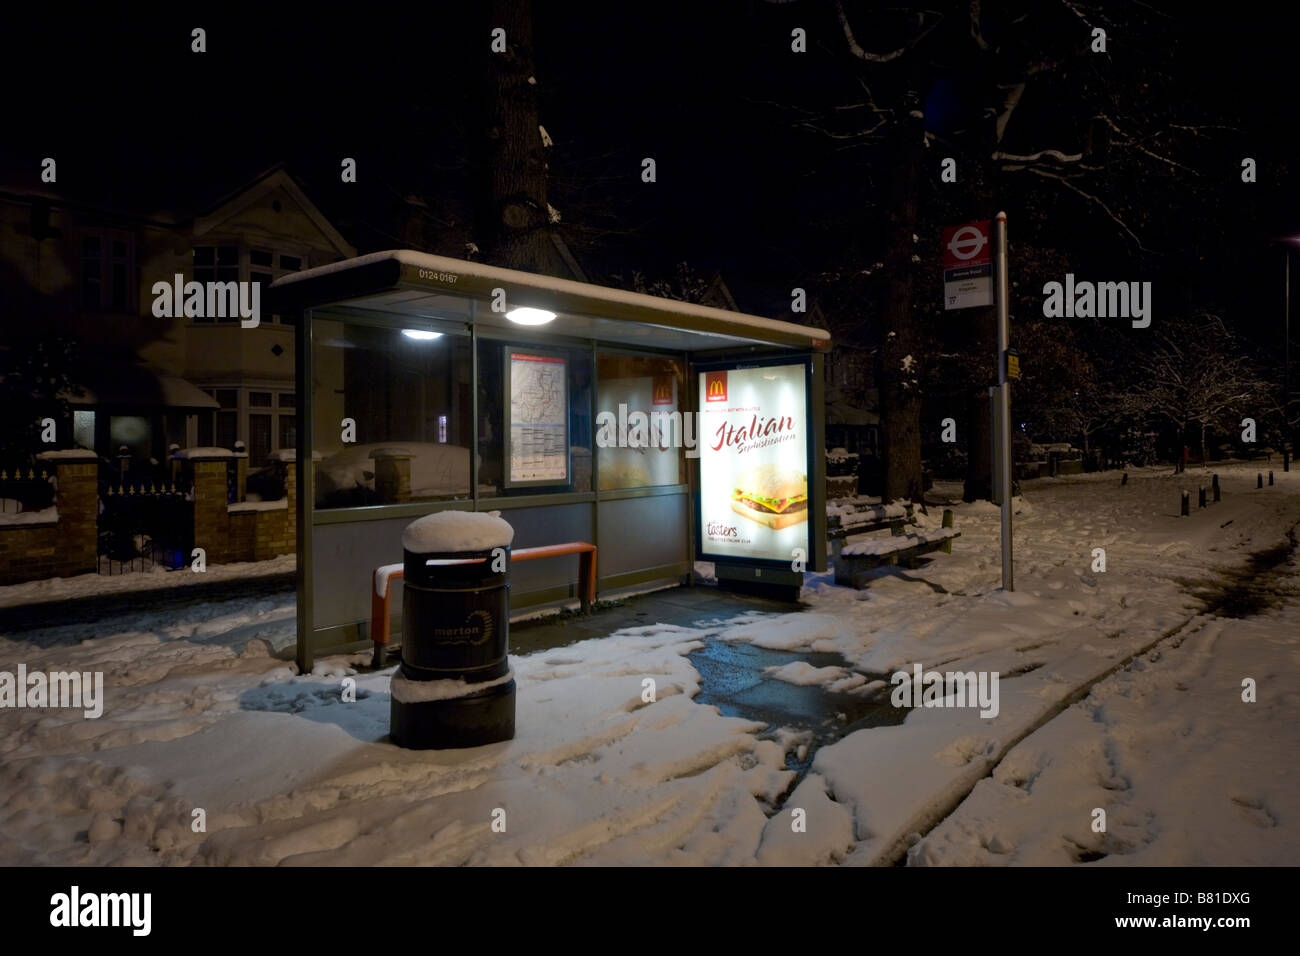 Suburban bus Stop in London at night in the snow Stock Photo